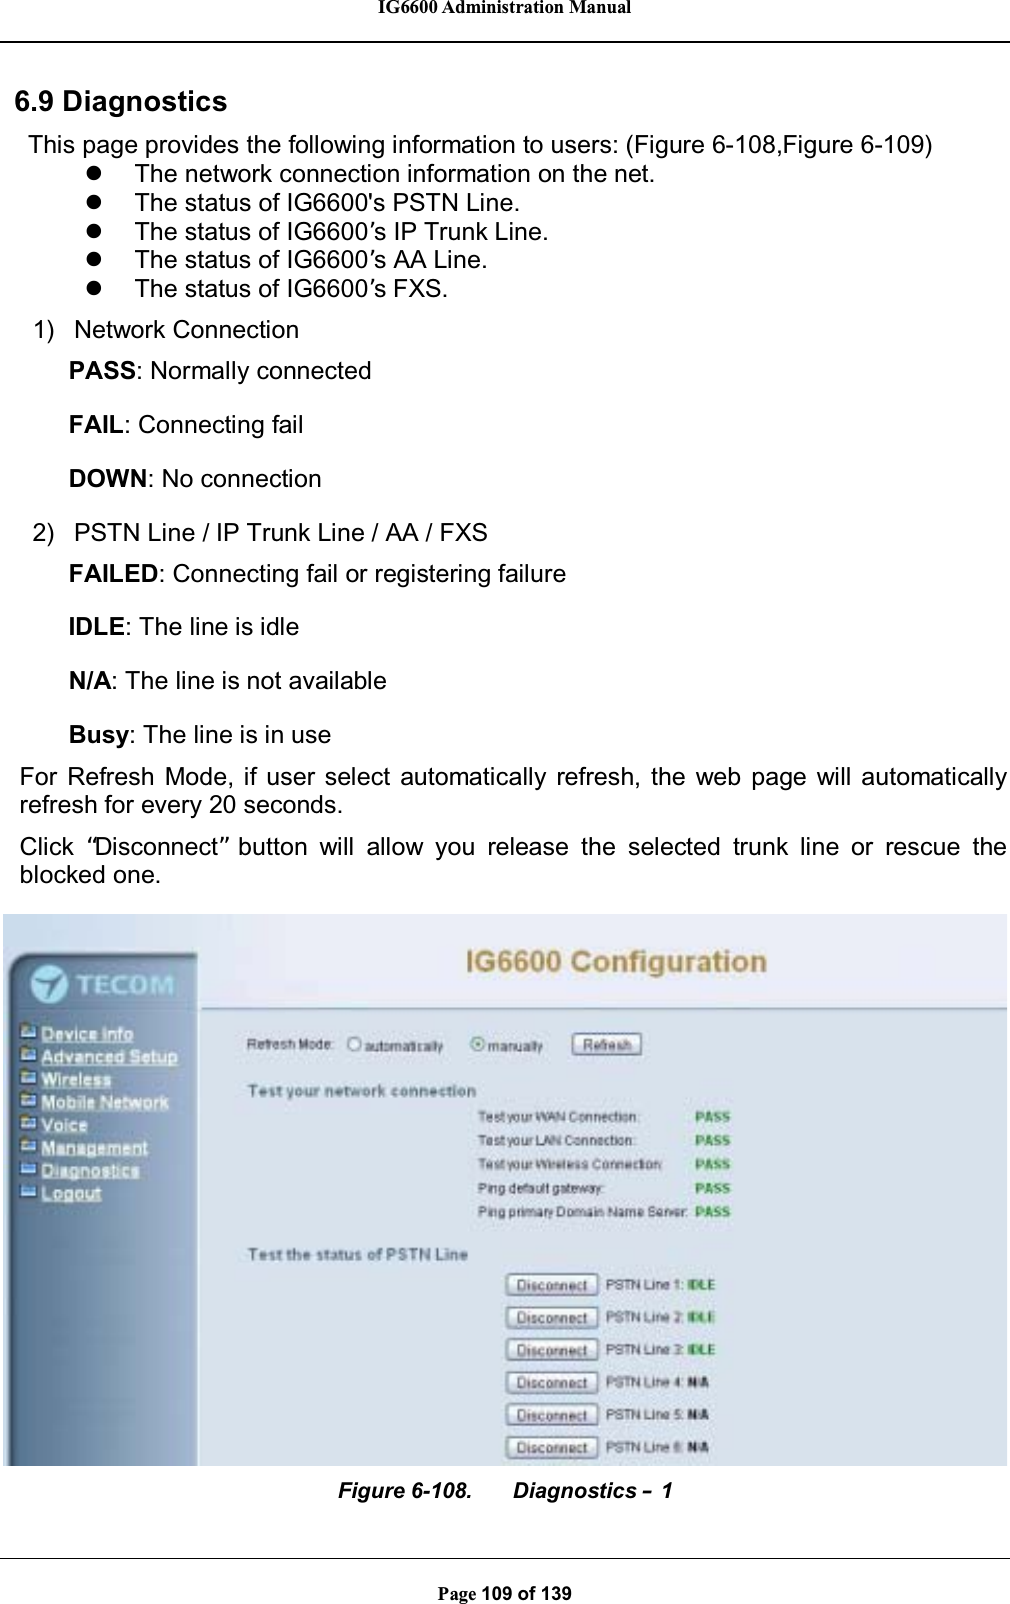 IG6600 Administration ManualPage 109 of 1396.9 DiagnosticsThis page provides the following information to users: (Figure 6-108,Figure 6-109)zThe network connection information on the net.zThe status of IG6600&apos;s PSTN Line.zThe status of IG6600’s IP Trunk Line.zThe status of IG6600’s AA Line.zThe status of IG6600’s FXS.1) Network ConnectionPASS: Normally connectedFAIL: Connecting failDOWN: No connection2) PSTN Line / IP Trunk Line / AA / FXSFAILED: Connecting fail or registering failureIDLE: The line is idleN/A: The line is not availableBusy: The line is in useFor Refresh Mode, if user select automatically refresh, the web page will automaticallyrefresh for every 20 seconds.Click “Disconnect”button will allow you release the selected trunk line or rescue theblocked one.Figure 6-108. Diagnostics –1